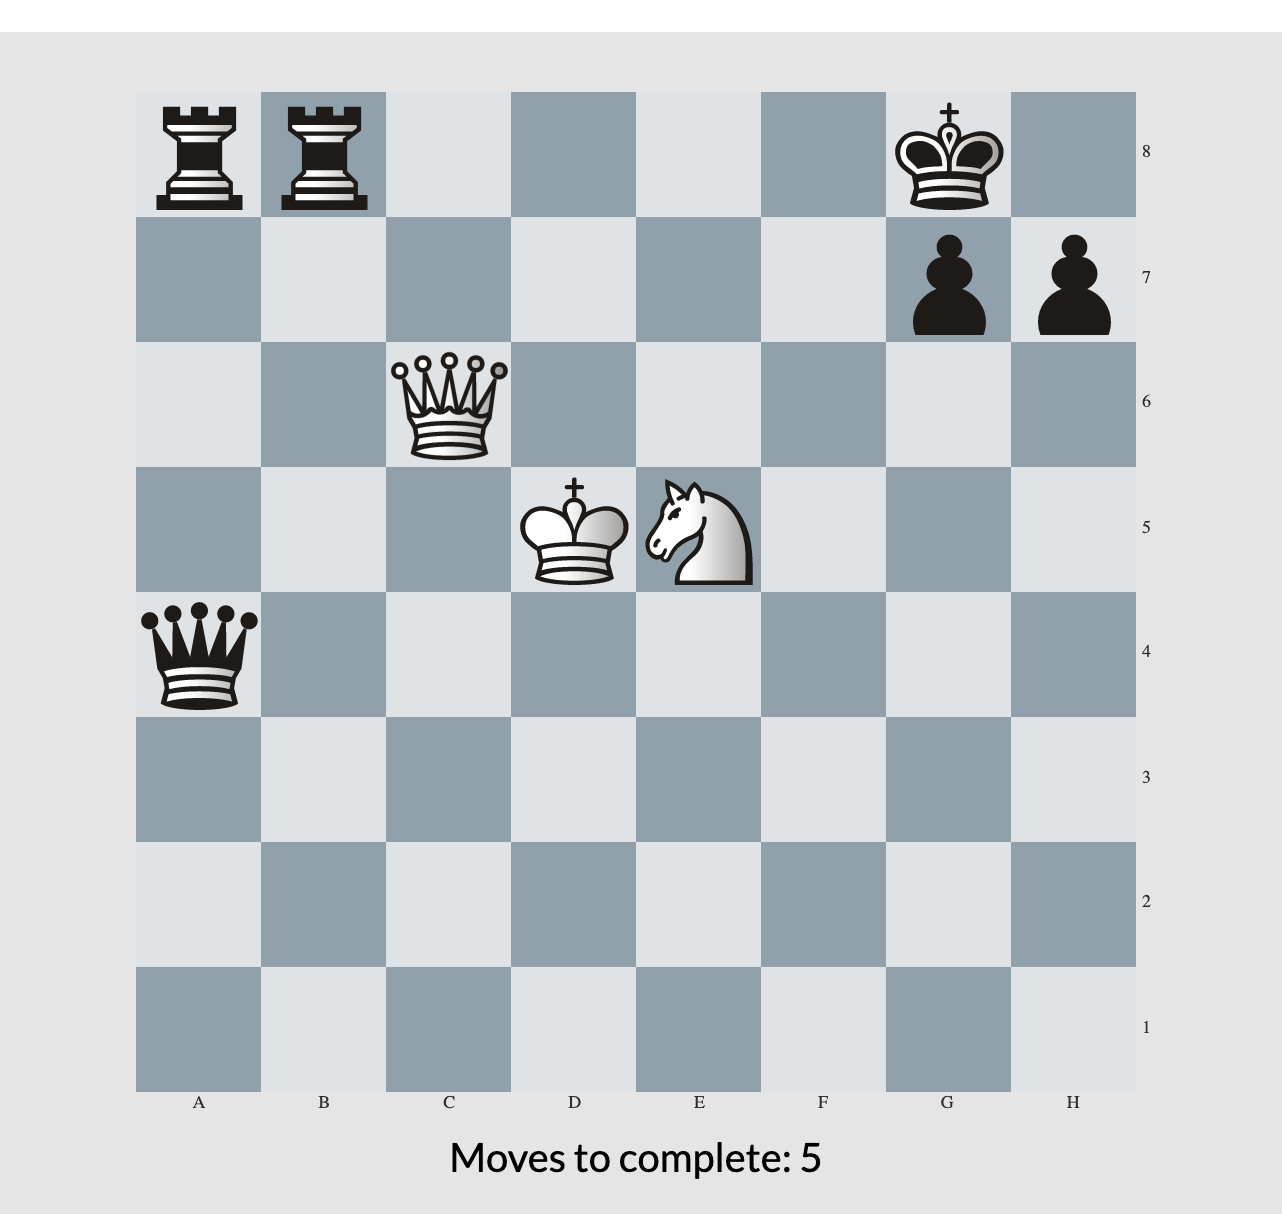 is this  puzzle correct? - Chess Forums 